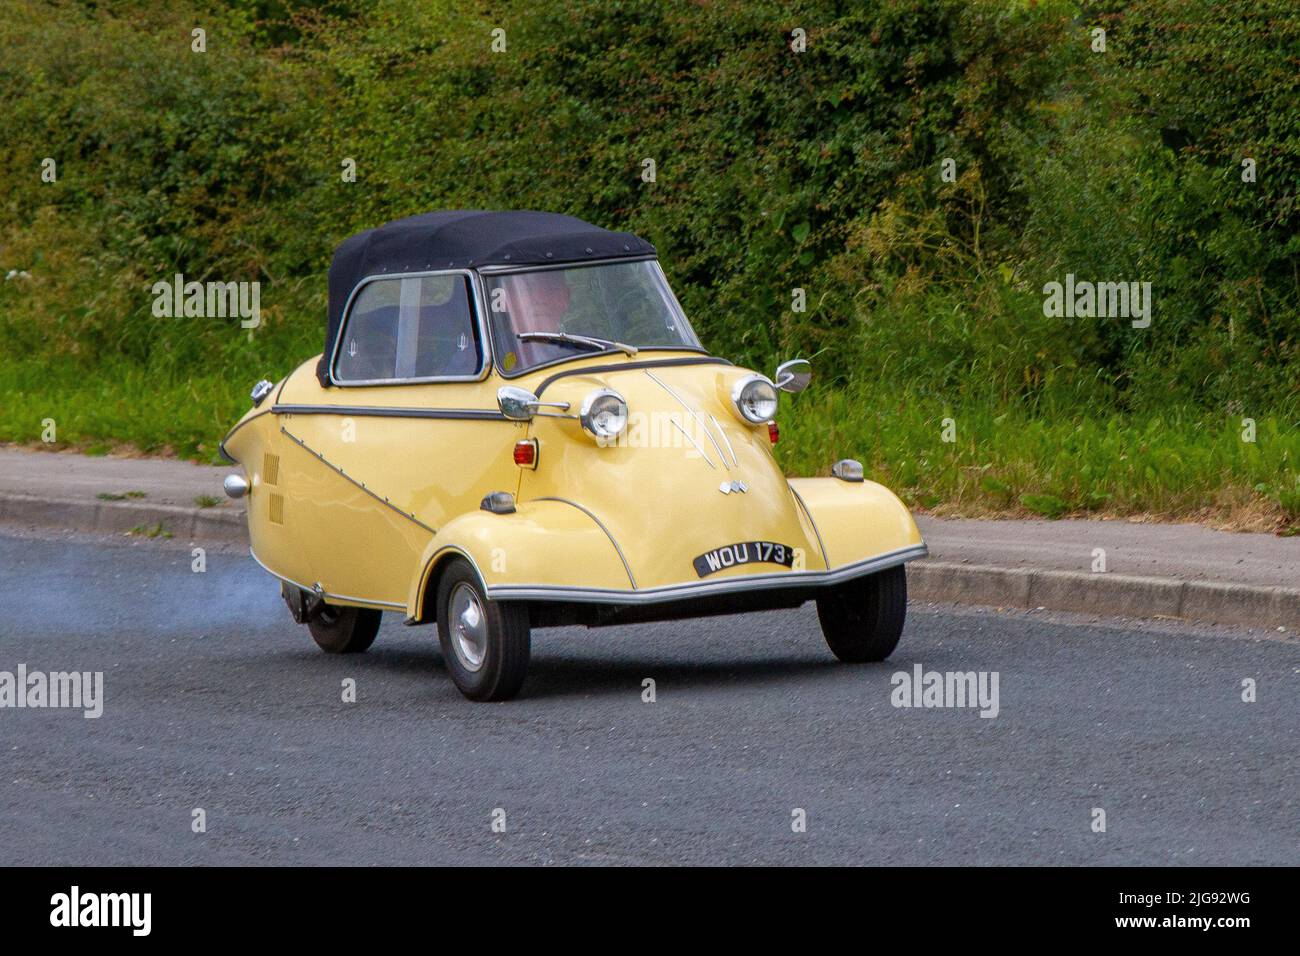 1959 50s fifties yellow Messerschmitt Bubble Car, KR200, or Kabinenroller (Cabin Scooter 191cc motorcycle en-route to Hoghton Tower for the Supercar Summer Showtime car meet which is organised by Great British Motor Shows in Preston, UK Stock Photo